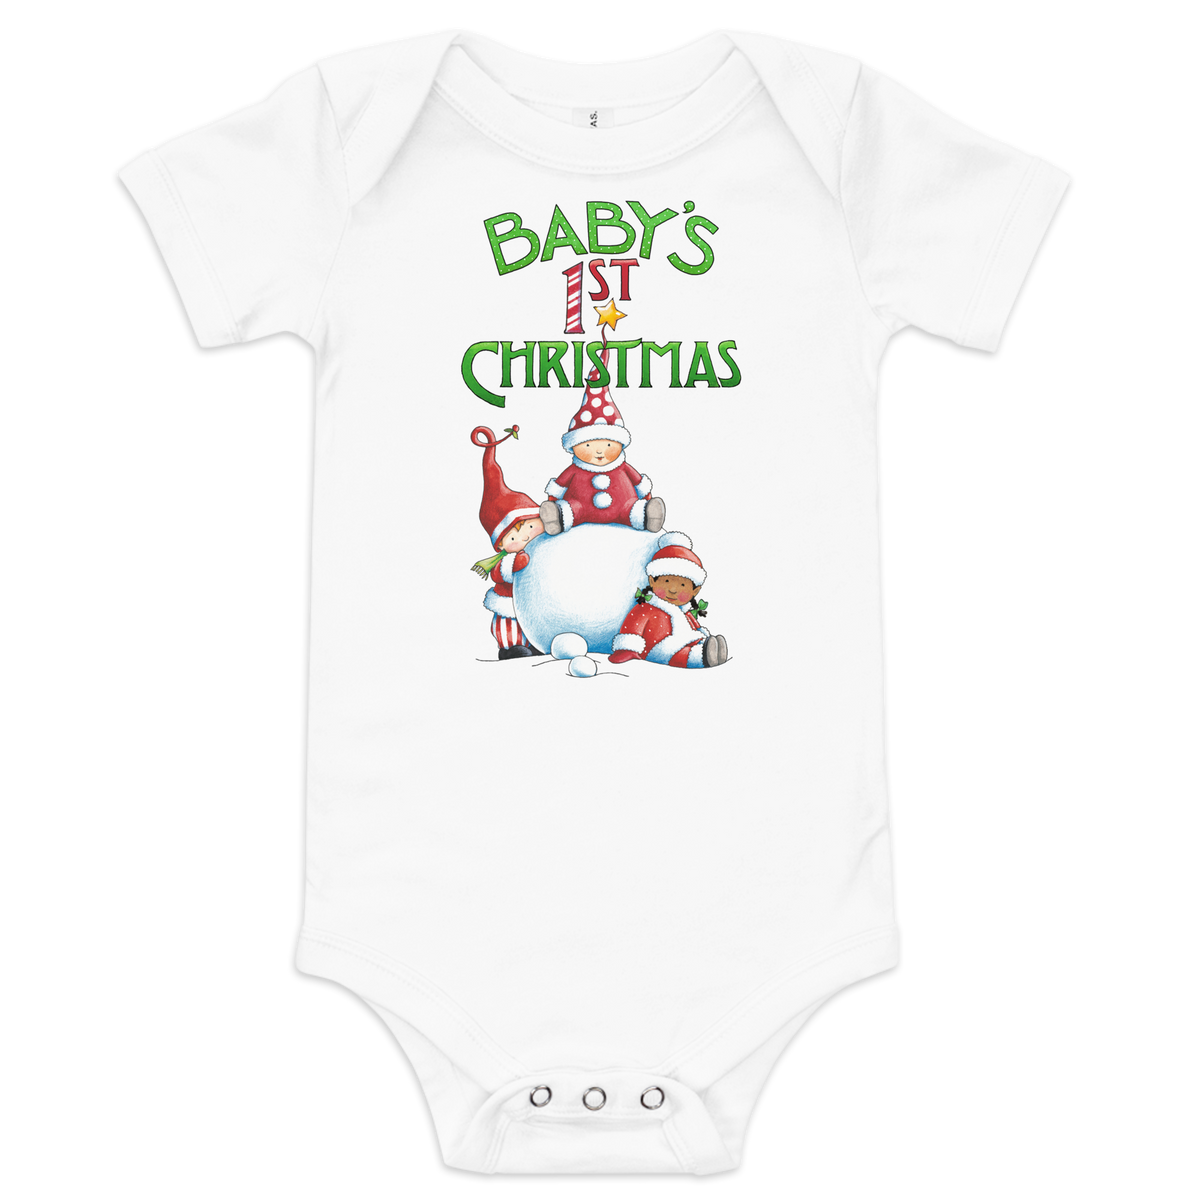 Baby's First Christmas Infant Bodysuit